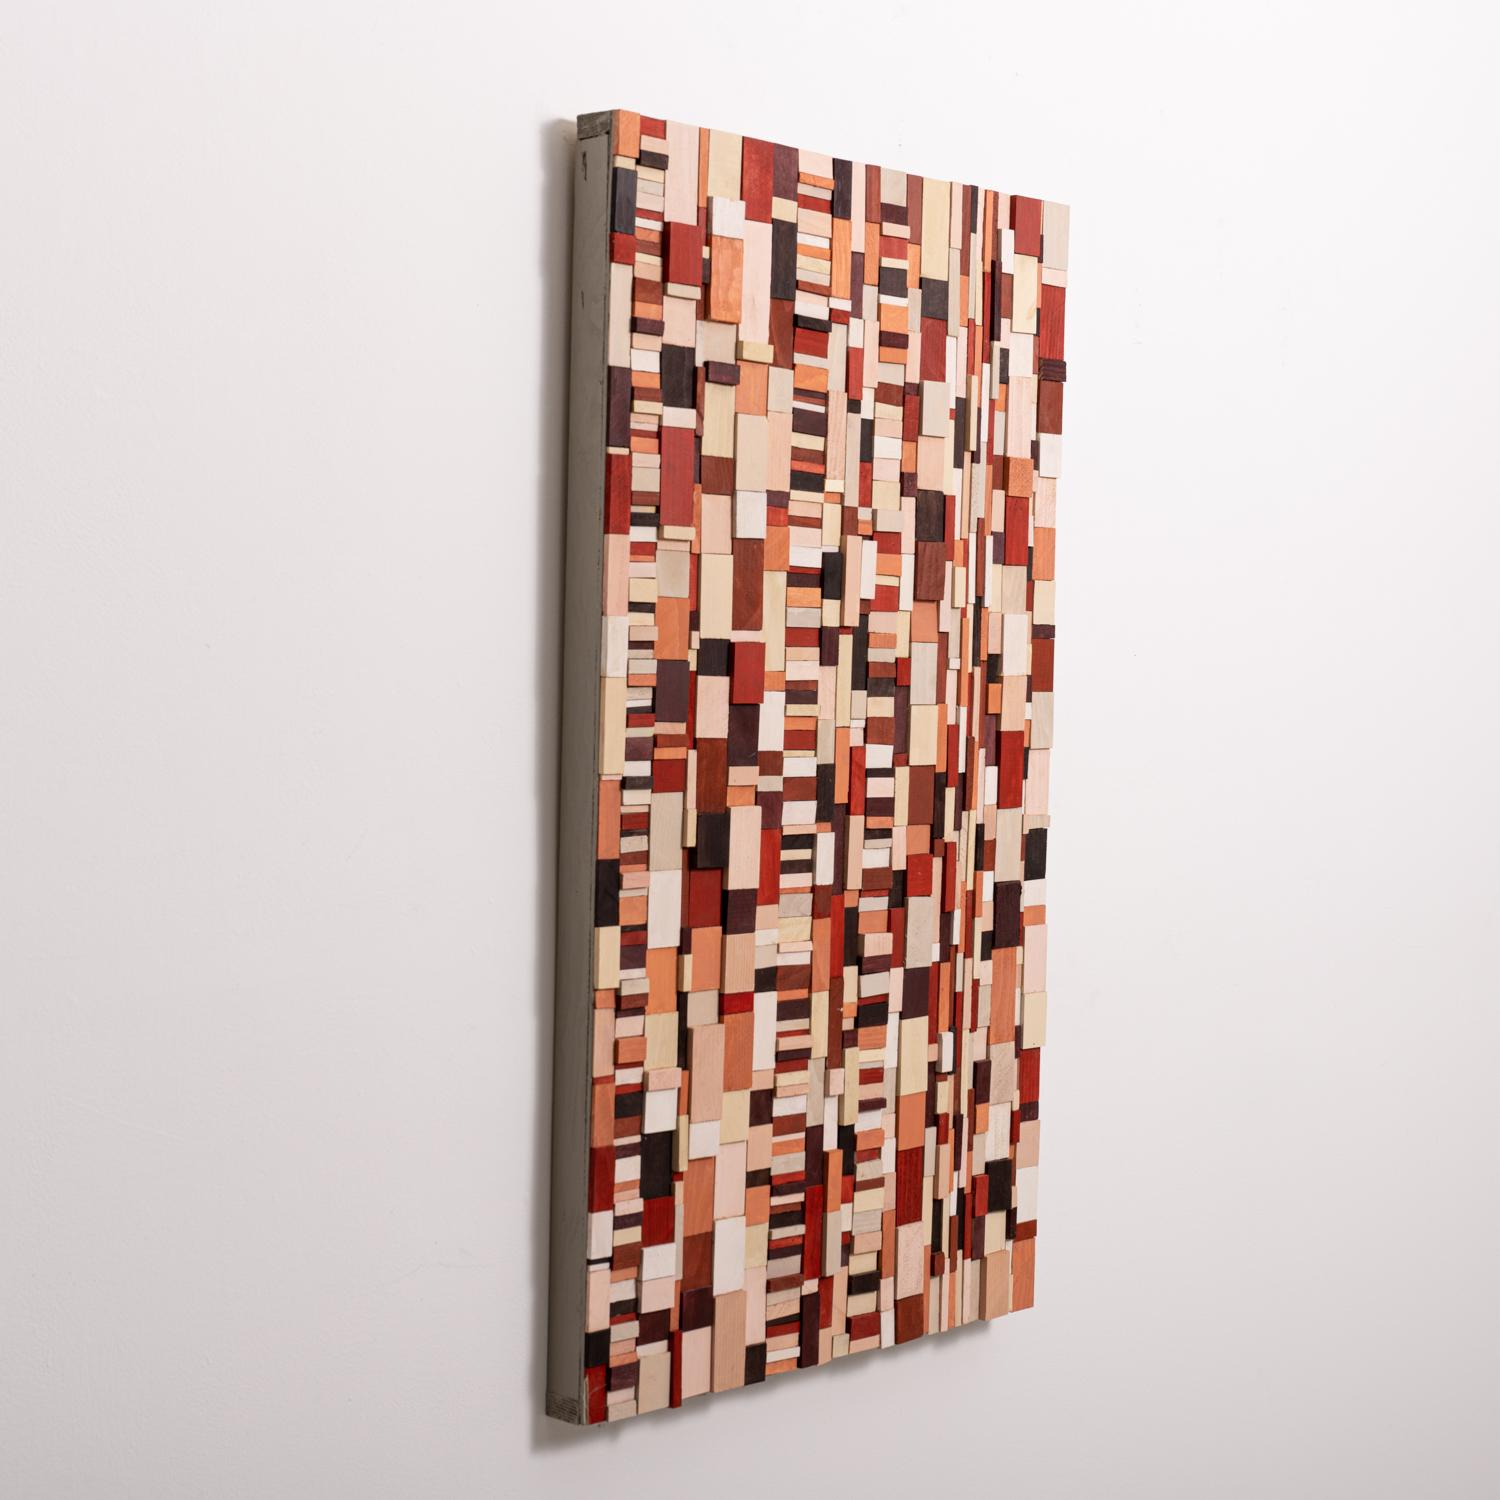 Abstract geometric three-dimensional wood wall sculpture in a rich palette of brick red, burgundy, and cream
